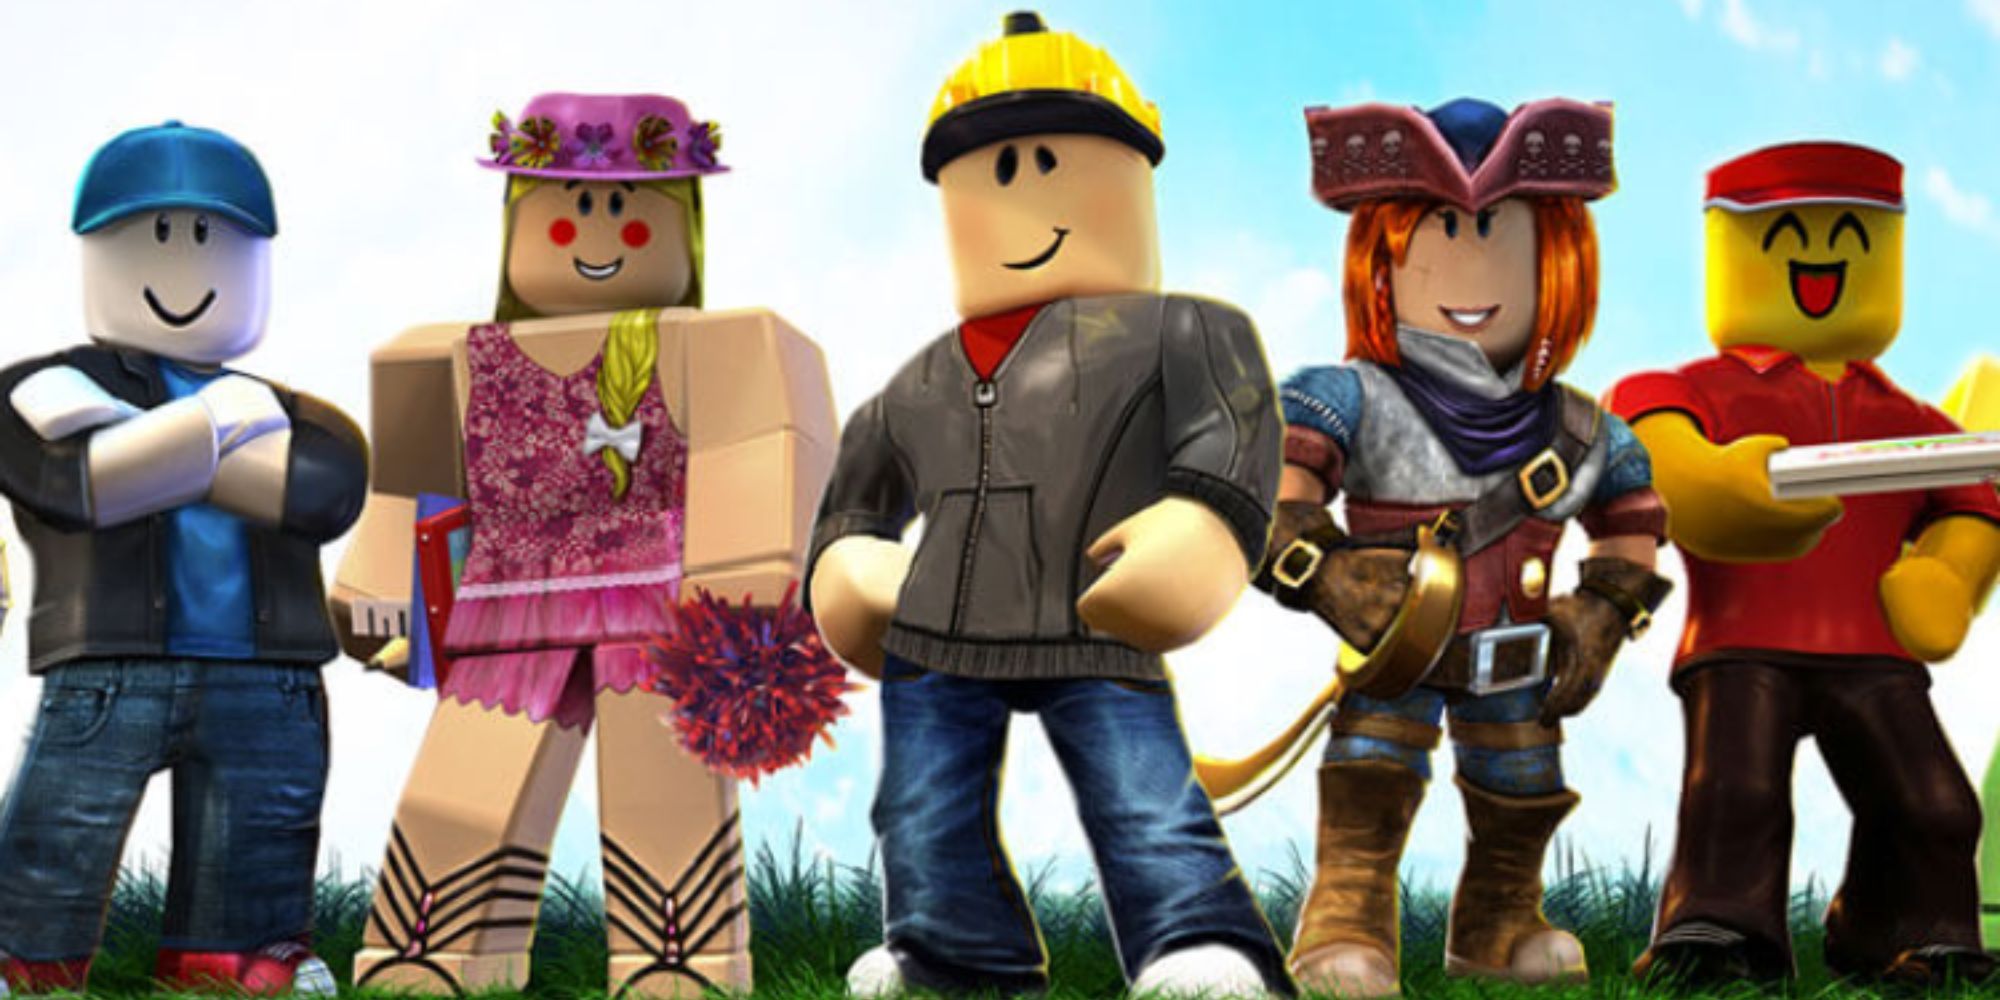 13 Best Roblox Games To Play With Your Friends